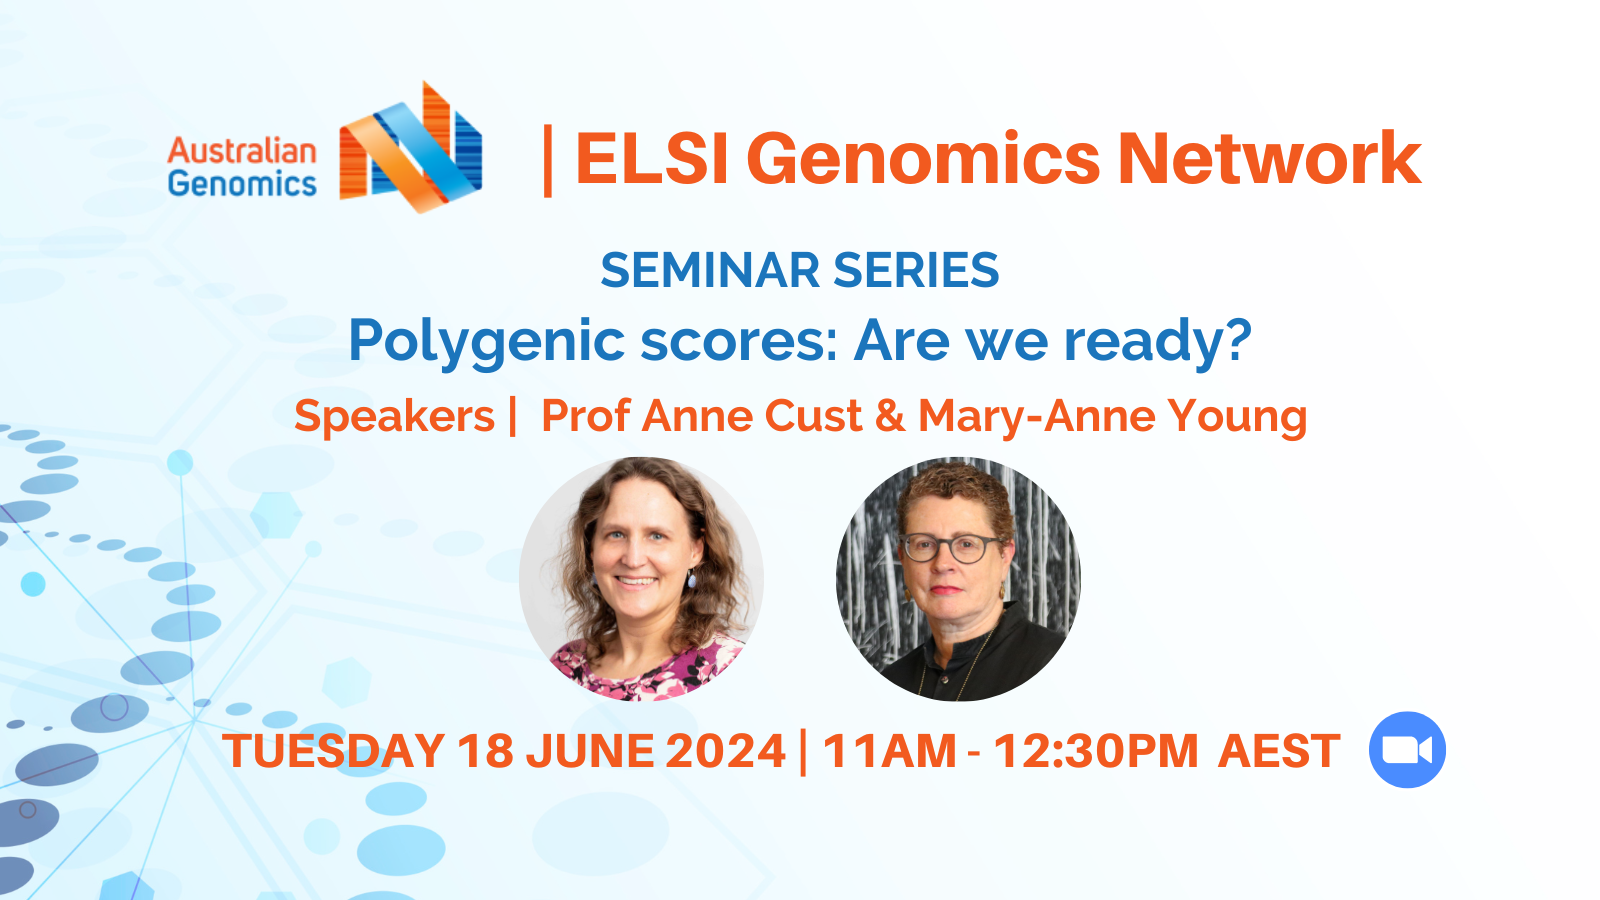 ELSI Genomics Network Seminar on Tuesday 18 June 2024 - Polygenic scores: Are we ready?